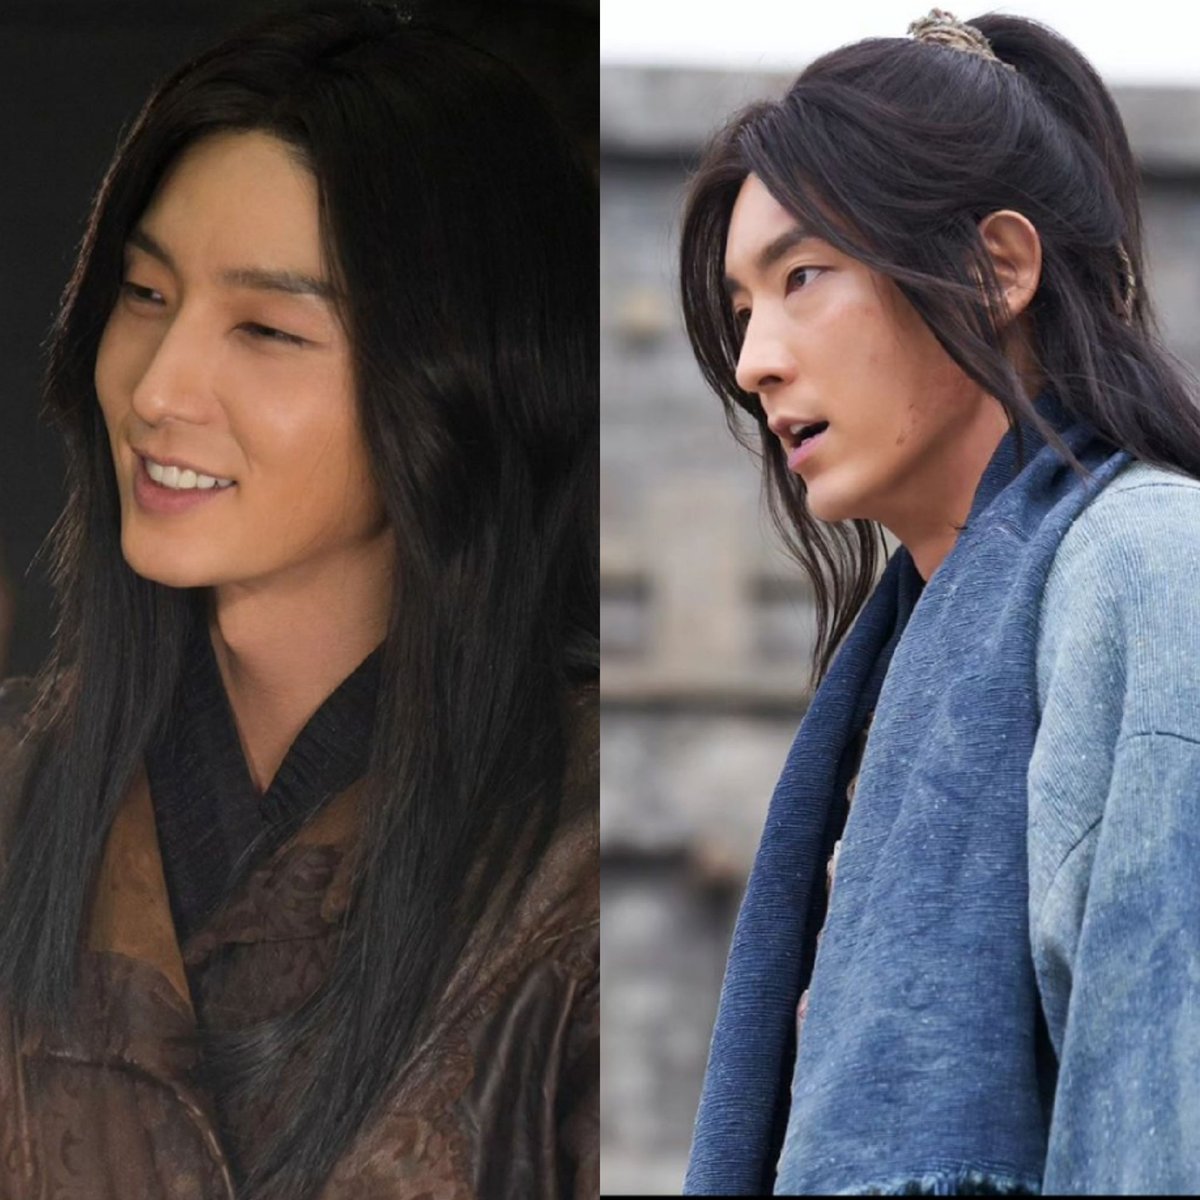 Guess who is the older brother? 

#ArthdalChronicles2 #ArthdalChronicles_TheSwordofAramun